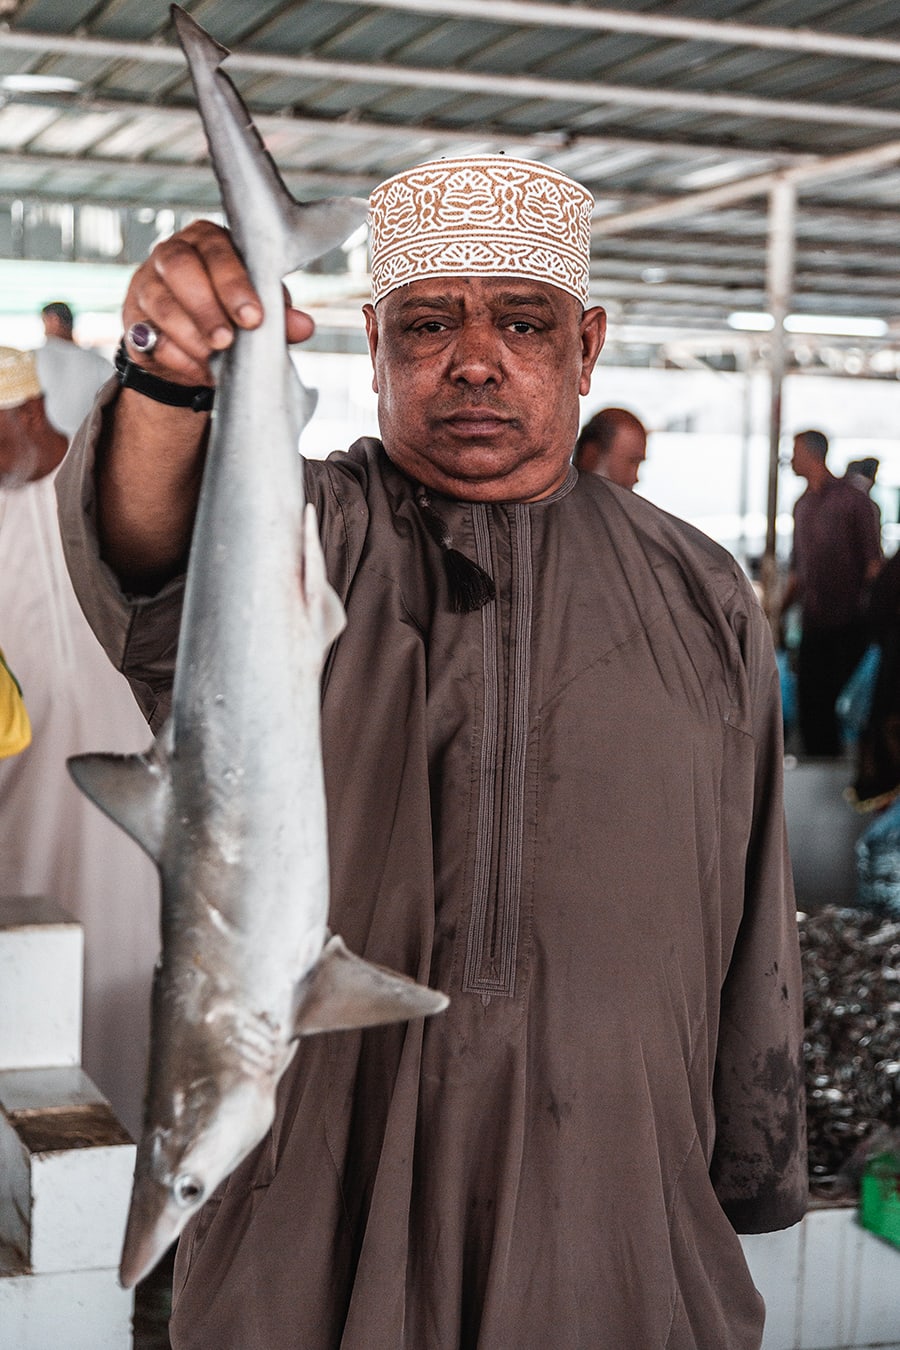 A vendor holds up a shark at the fish market in Sur, Oman.